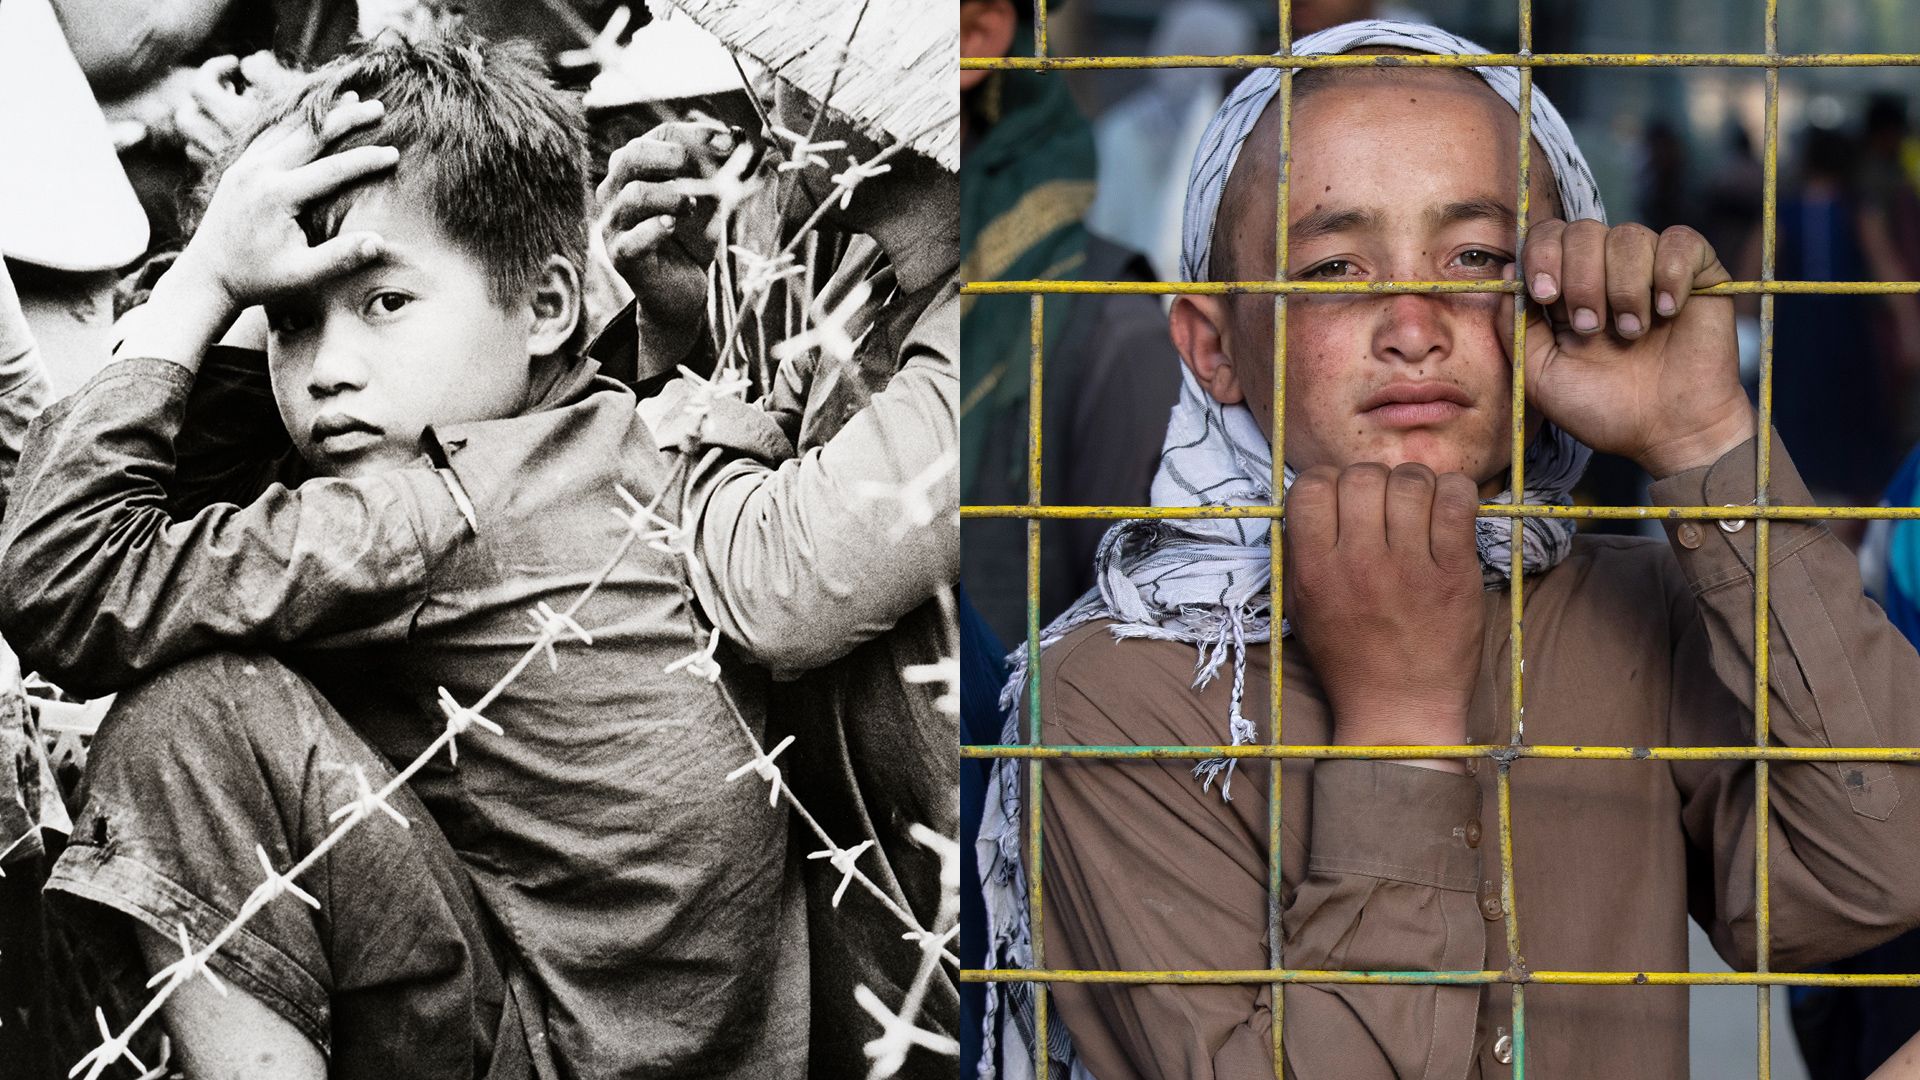 Side by side photos from the Vietnam and Afghanistan wars, showing children behind fences. 